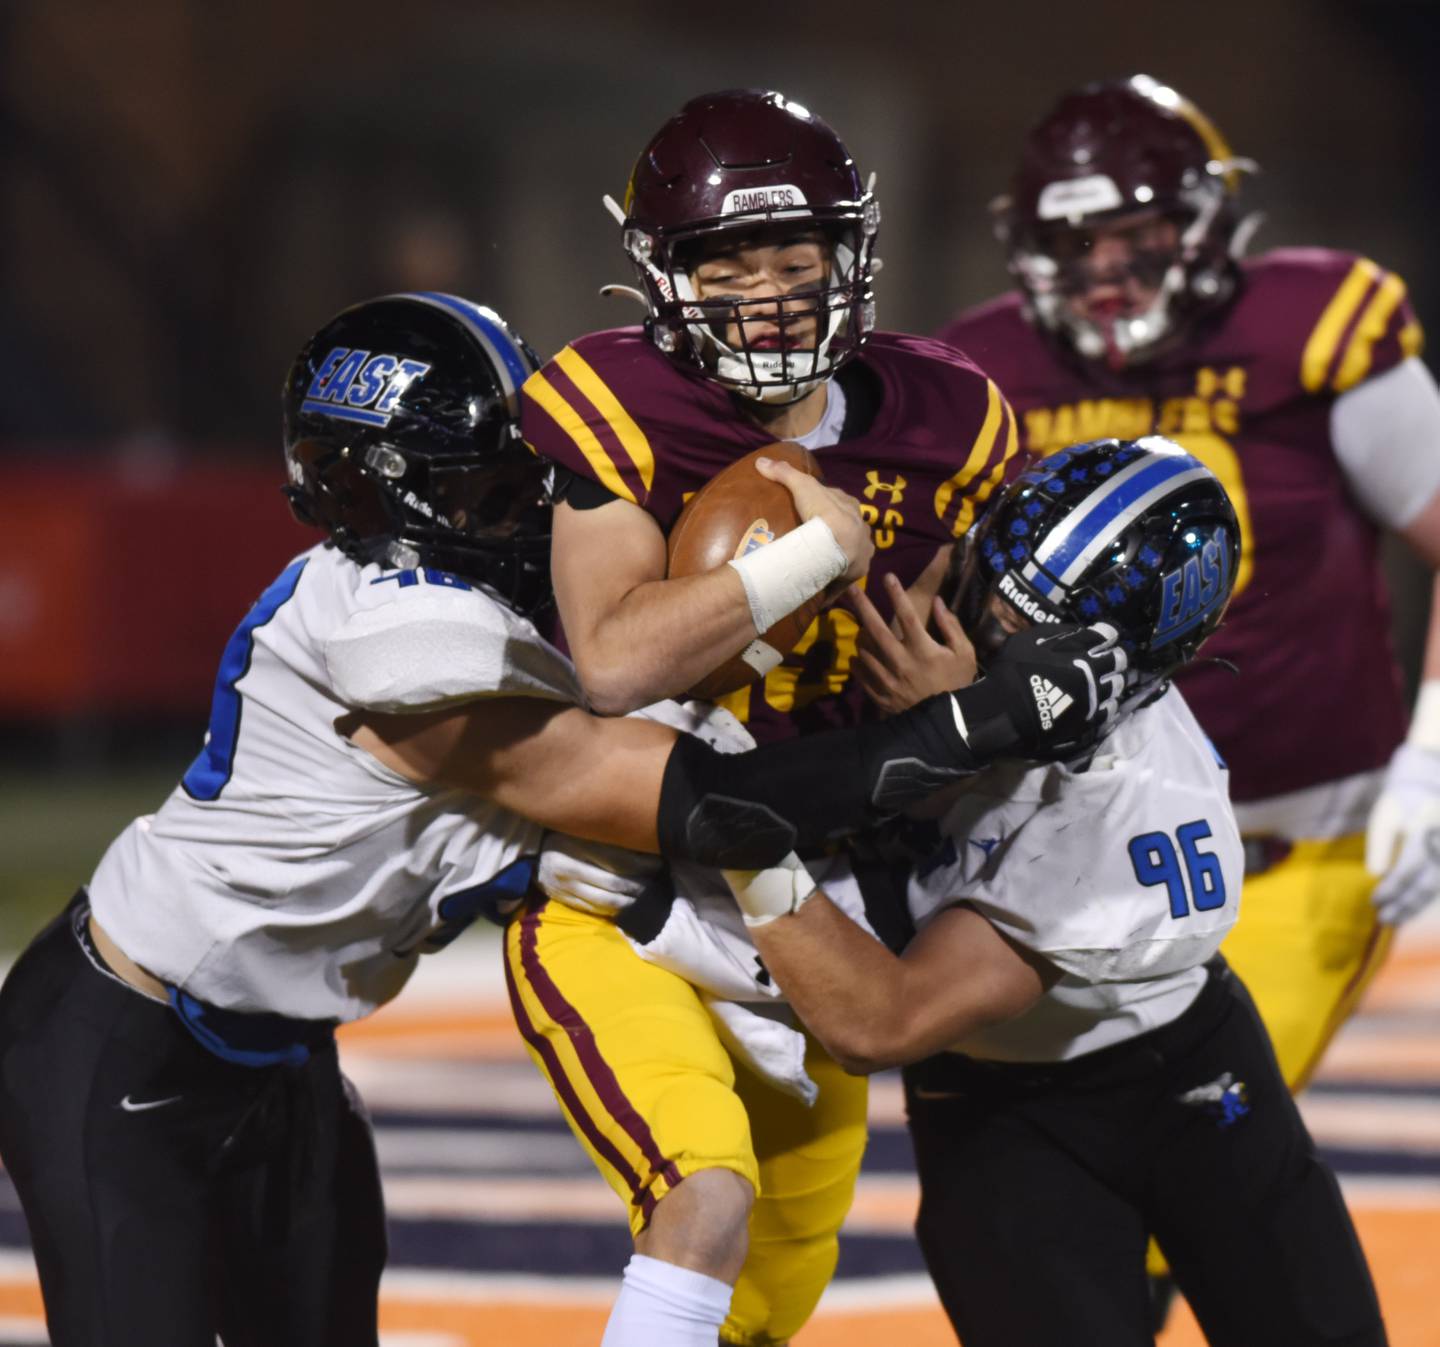 Loyola Academy quarterback Jake Stearney, middle, gets tackled by Lincoln-Way East's Joe Fushi, left, and Hank Ravetto during the Class 8A football state title game at Memorial Stadium in Champaign on Saturday, Nov. 26, 2022.